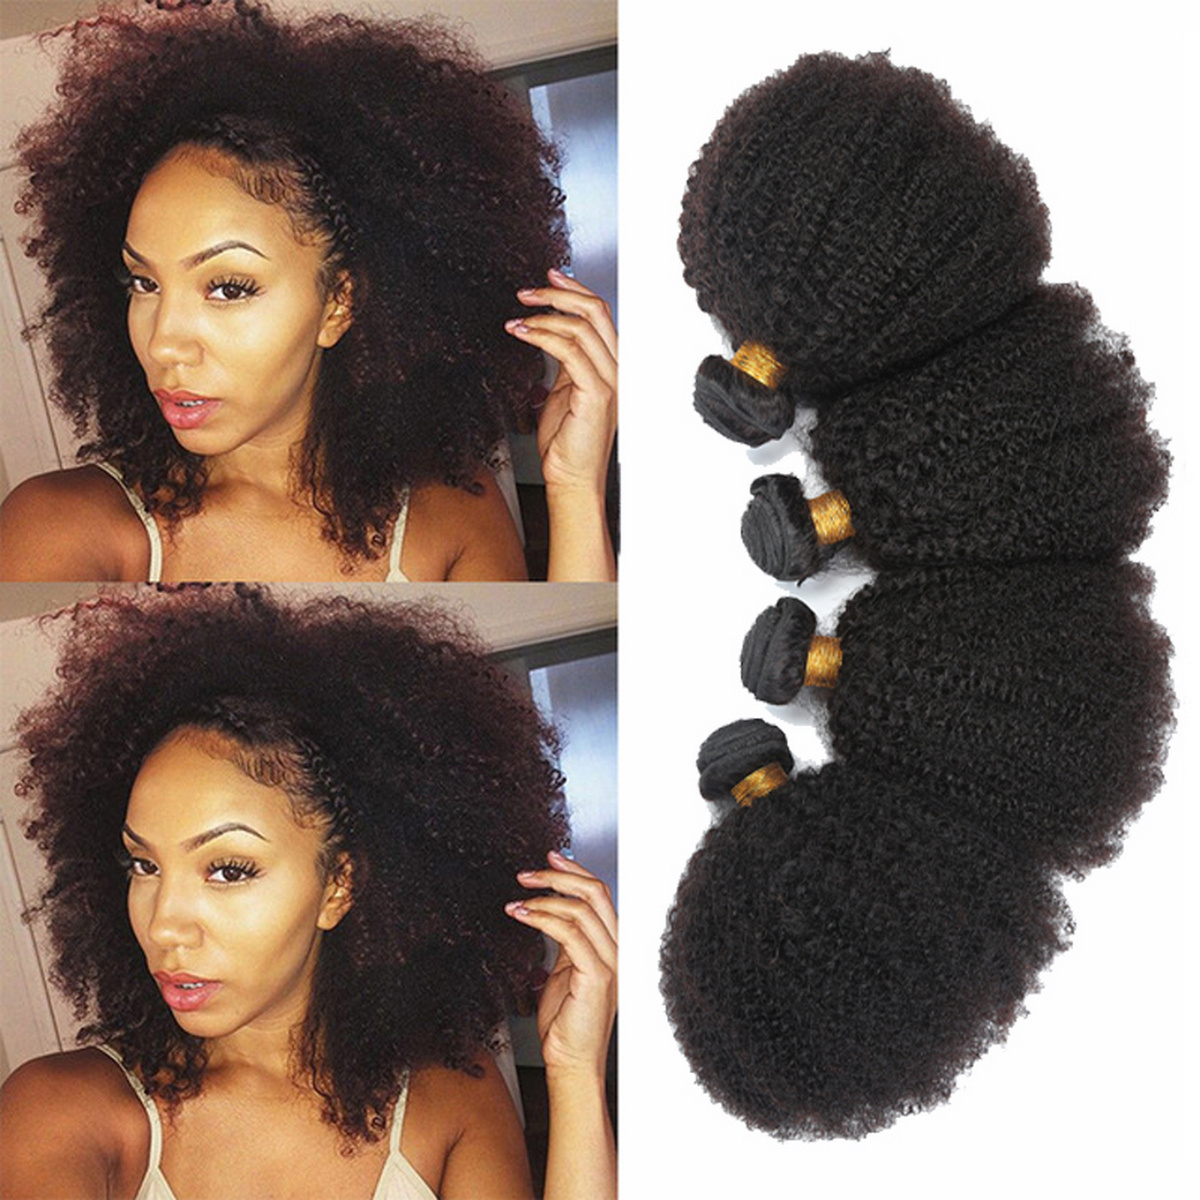 Afro Kinky Curly Hair Extensions